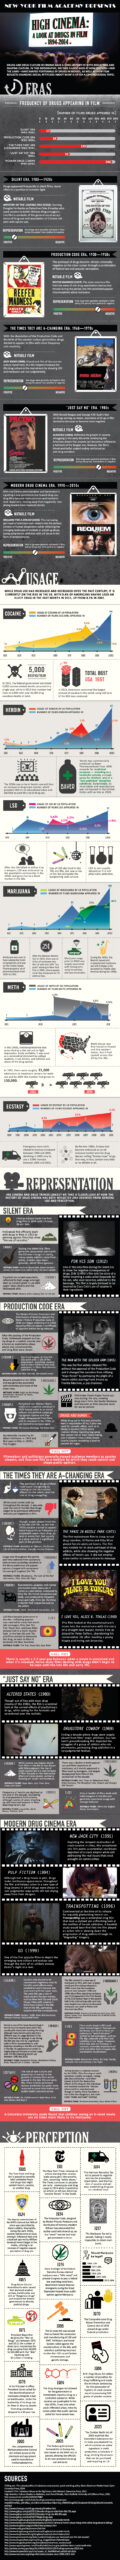 High Cinema Drugs in FIlm Infographic